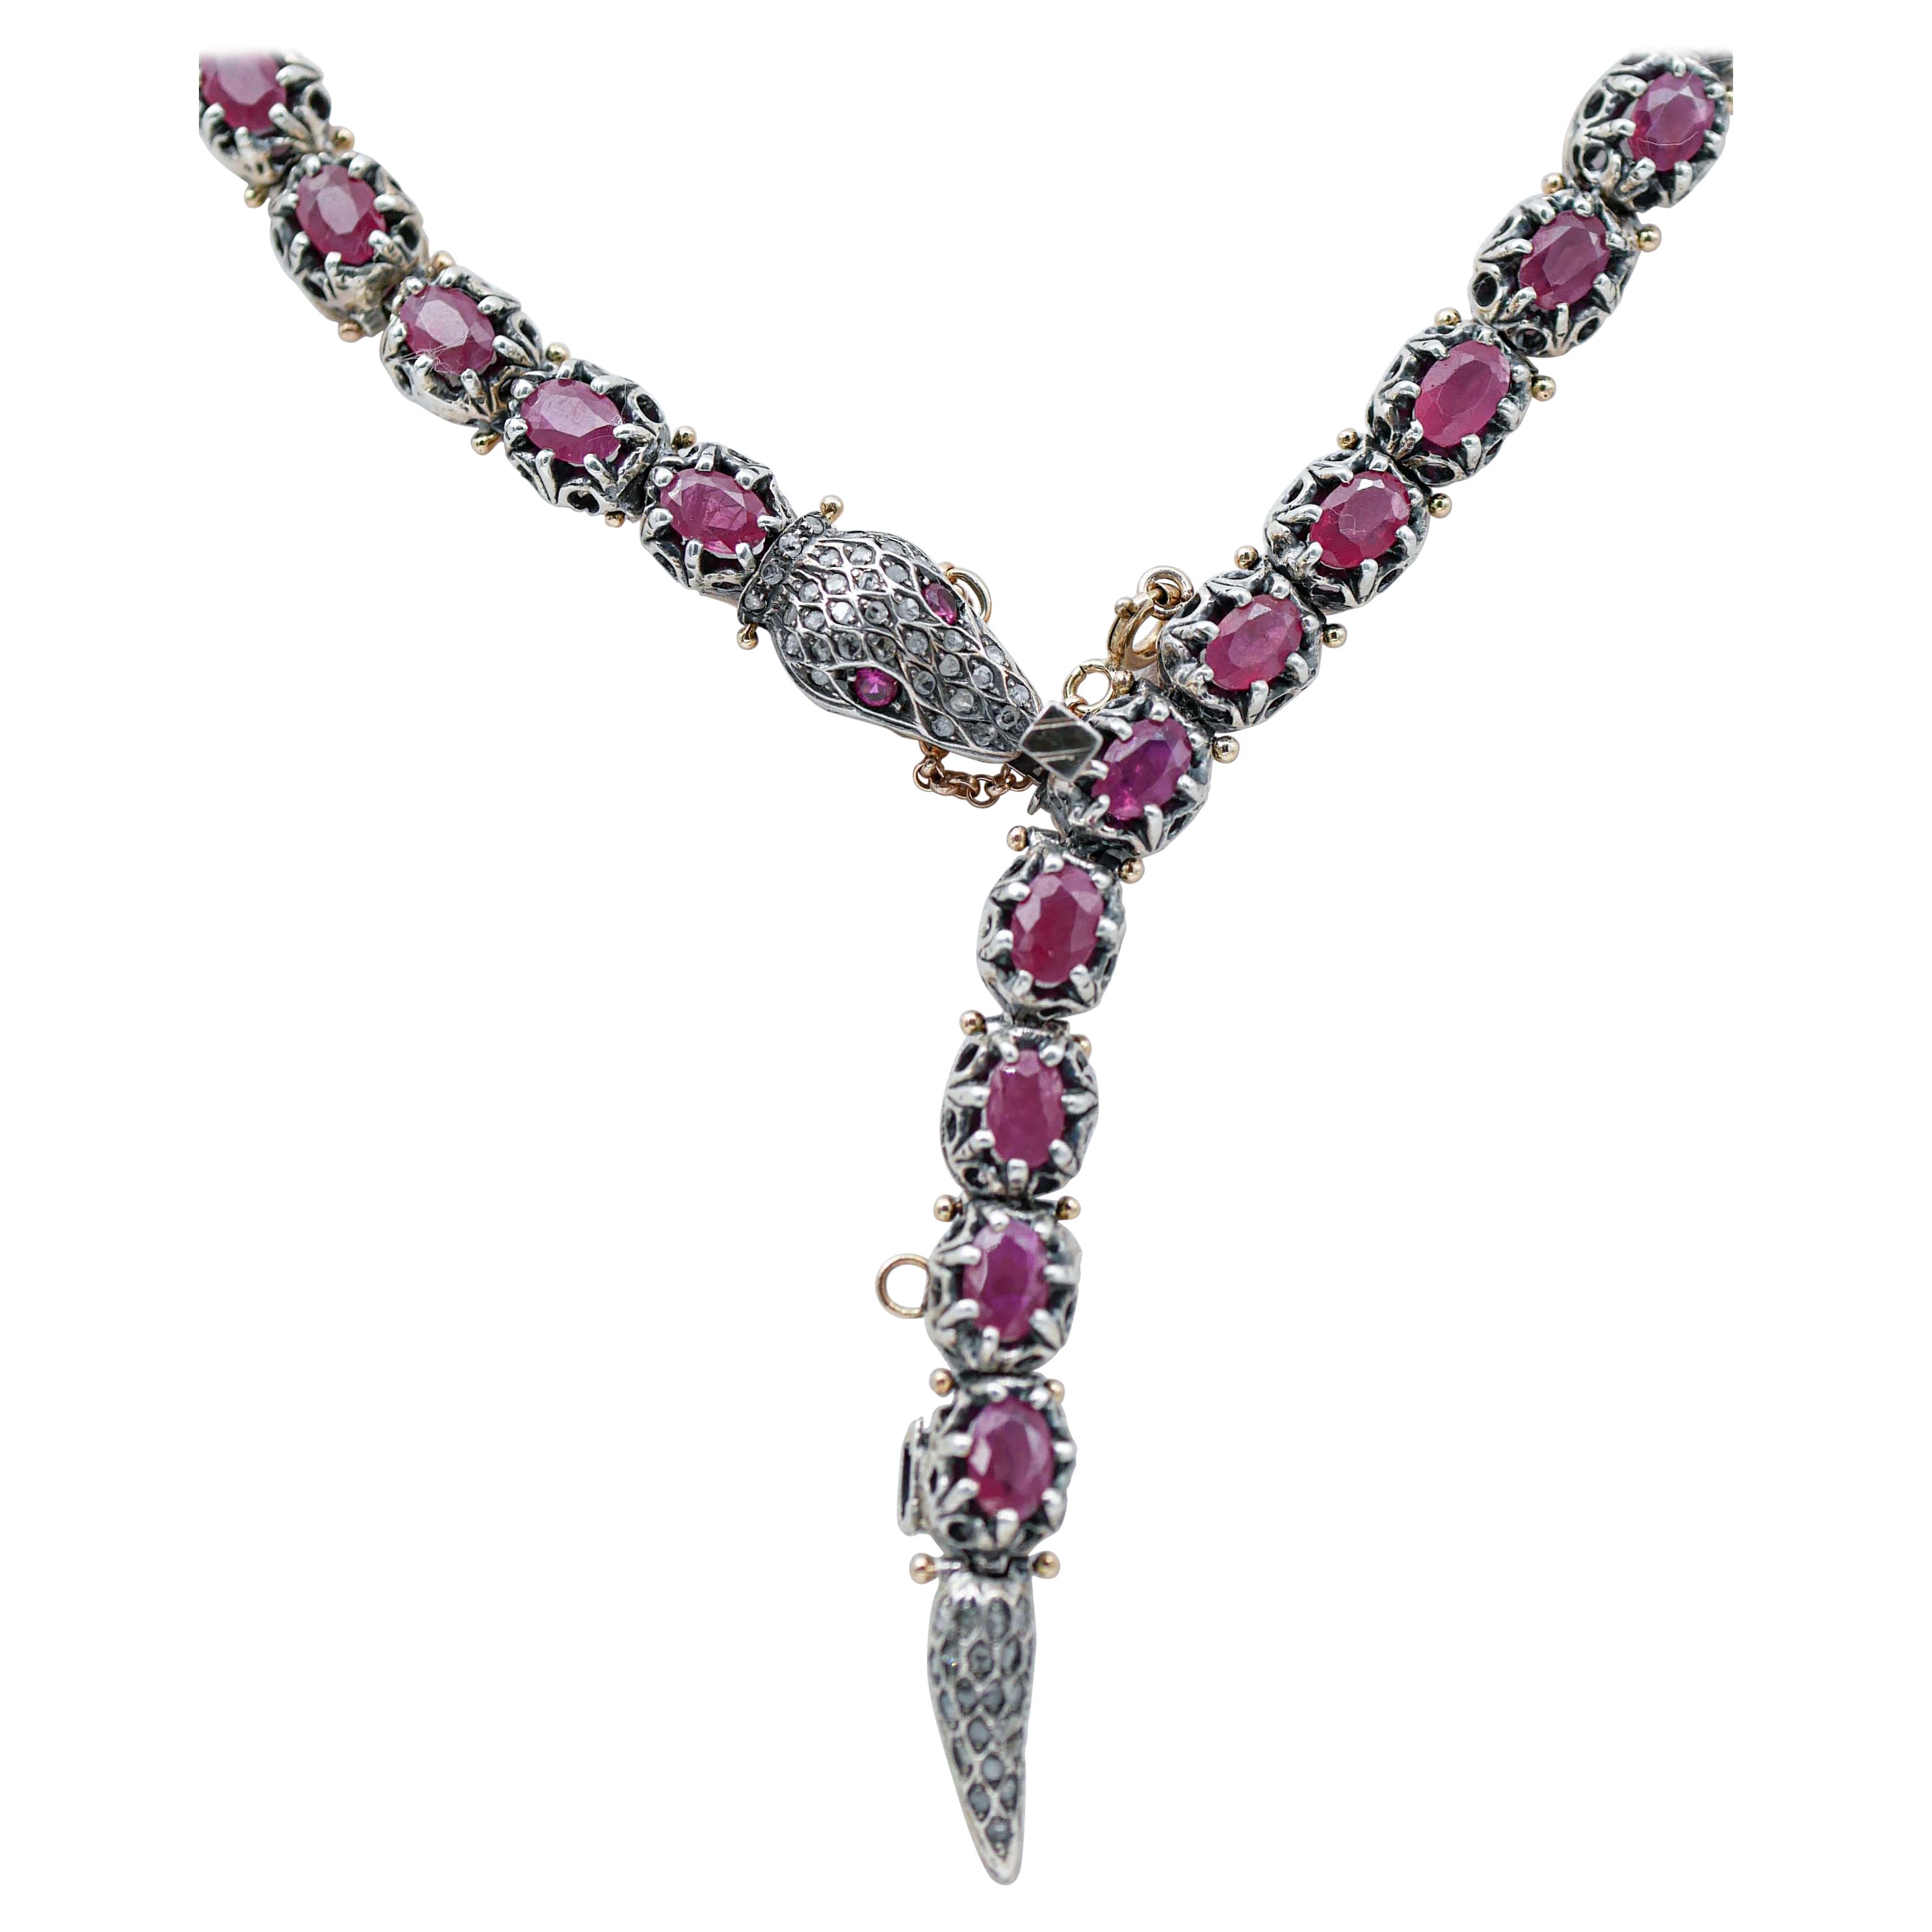 Rubies, Diamonds, Stones, Rose Gold and Silver Retro Snake Necklace For Sale